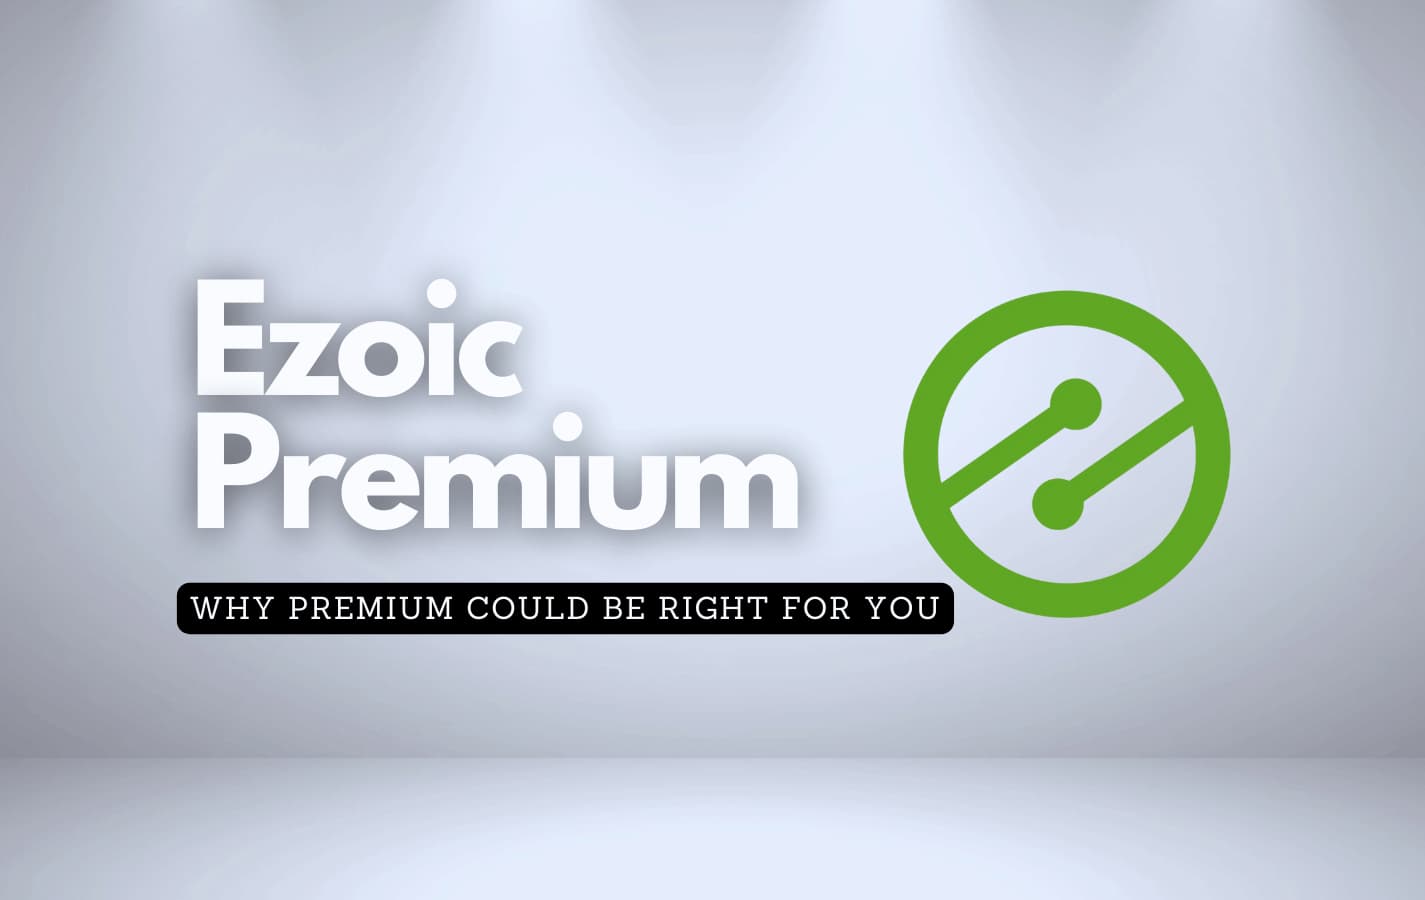 Ezoic logo against a white background with the text asking if Ezoic Premium is worth it